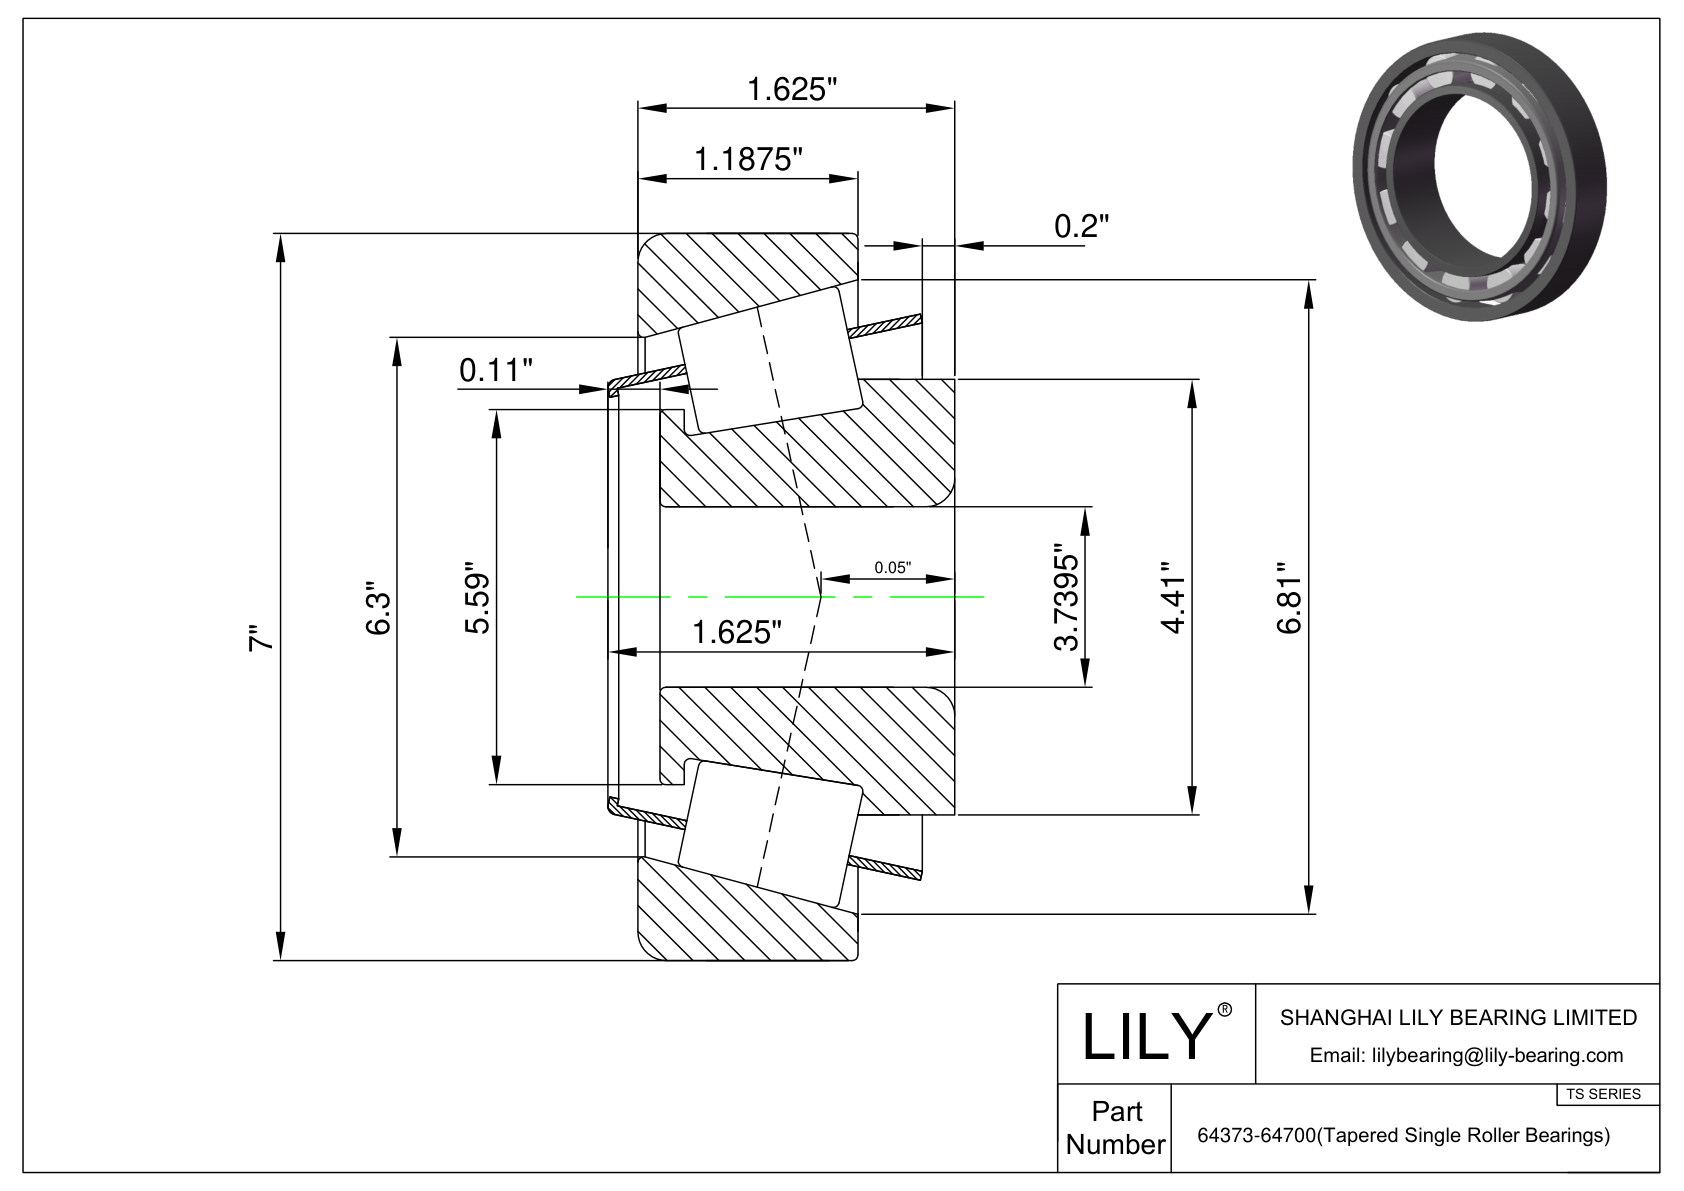 64373-64700 TS (Tapered Single Roller Bearings) (Imperial) cad drawing